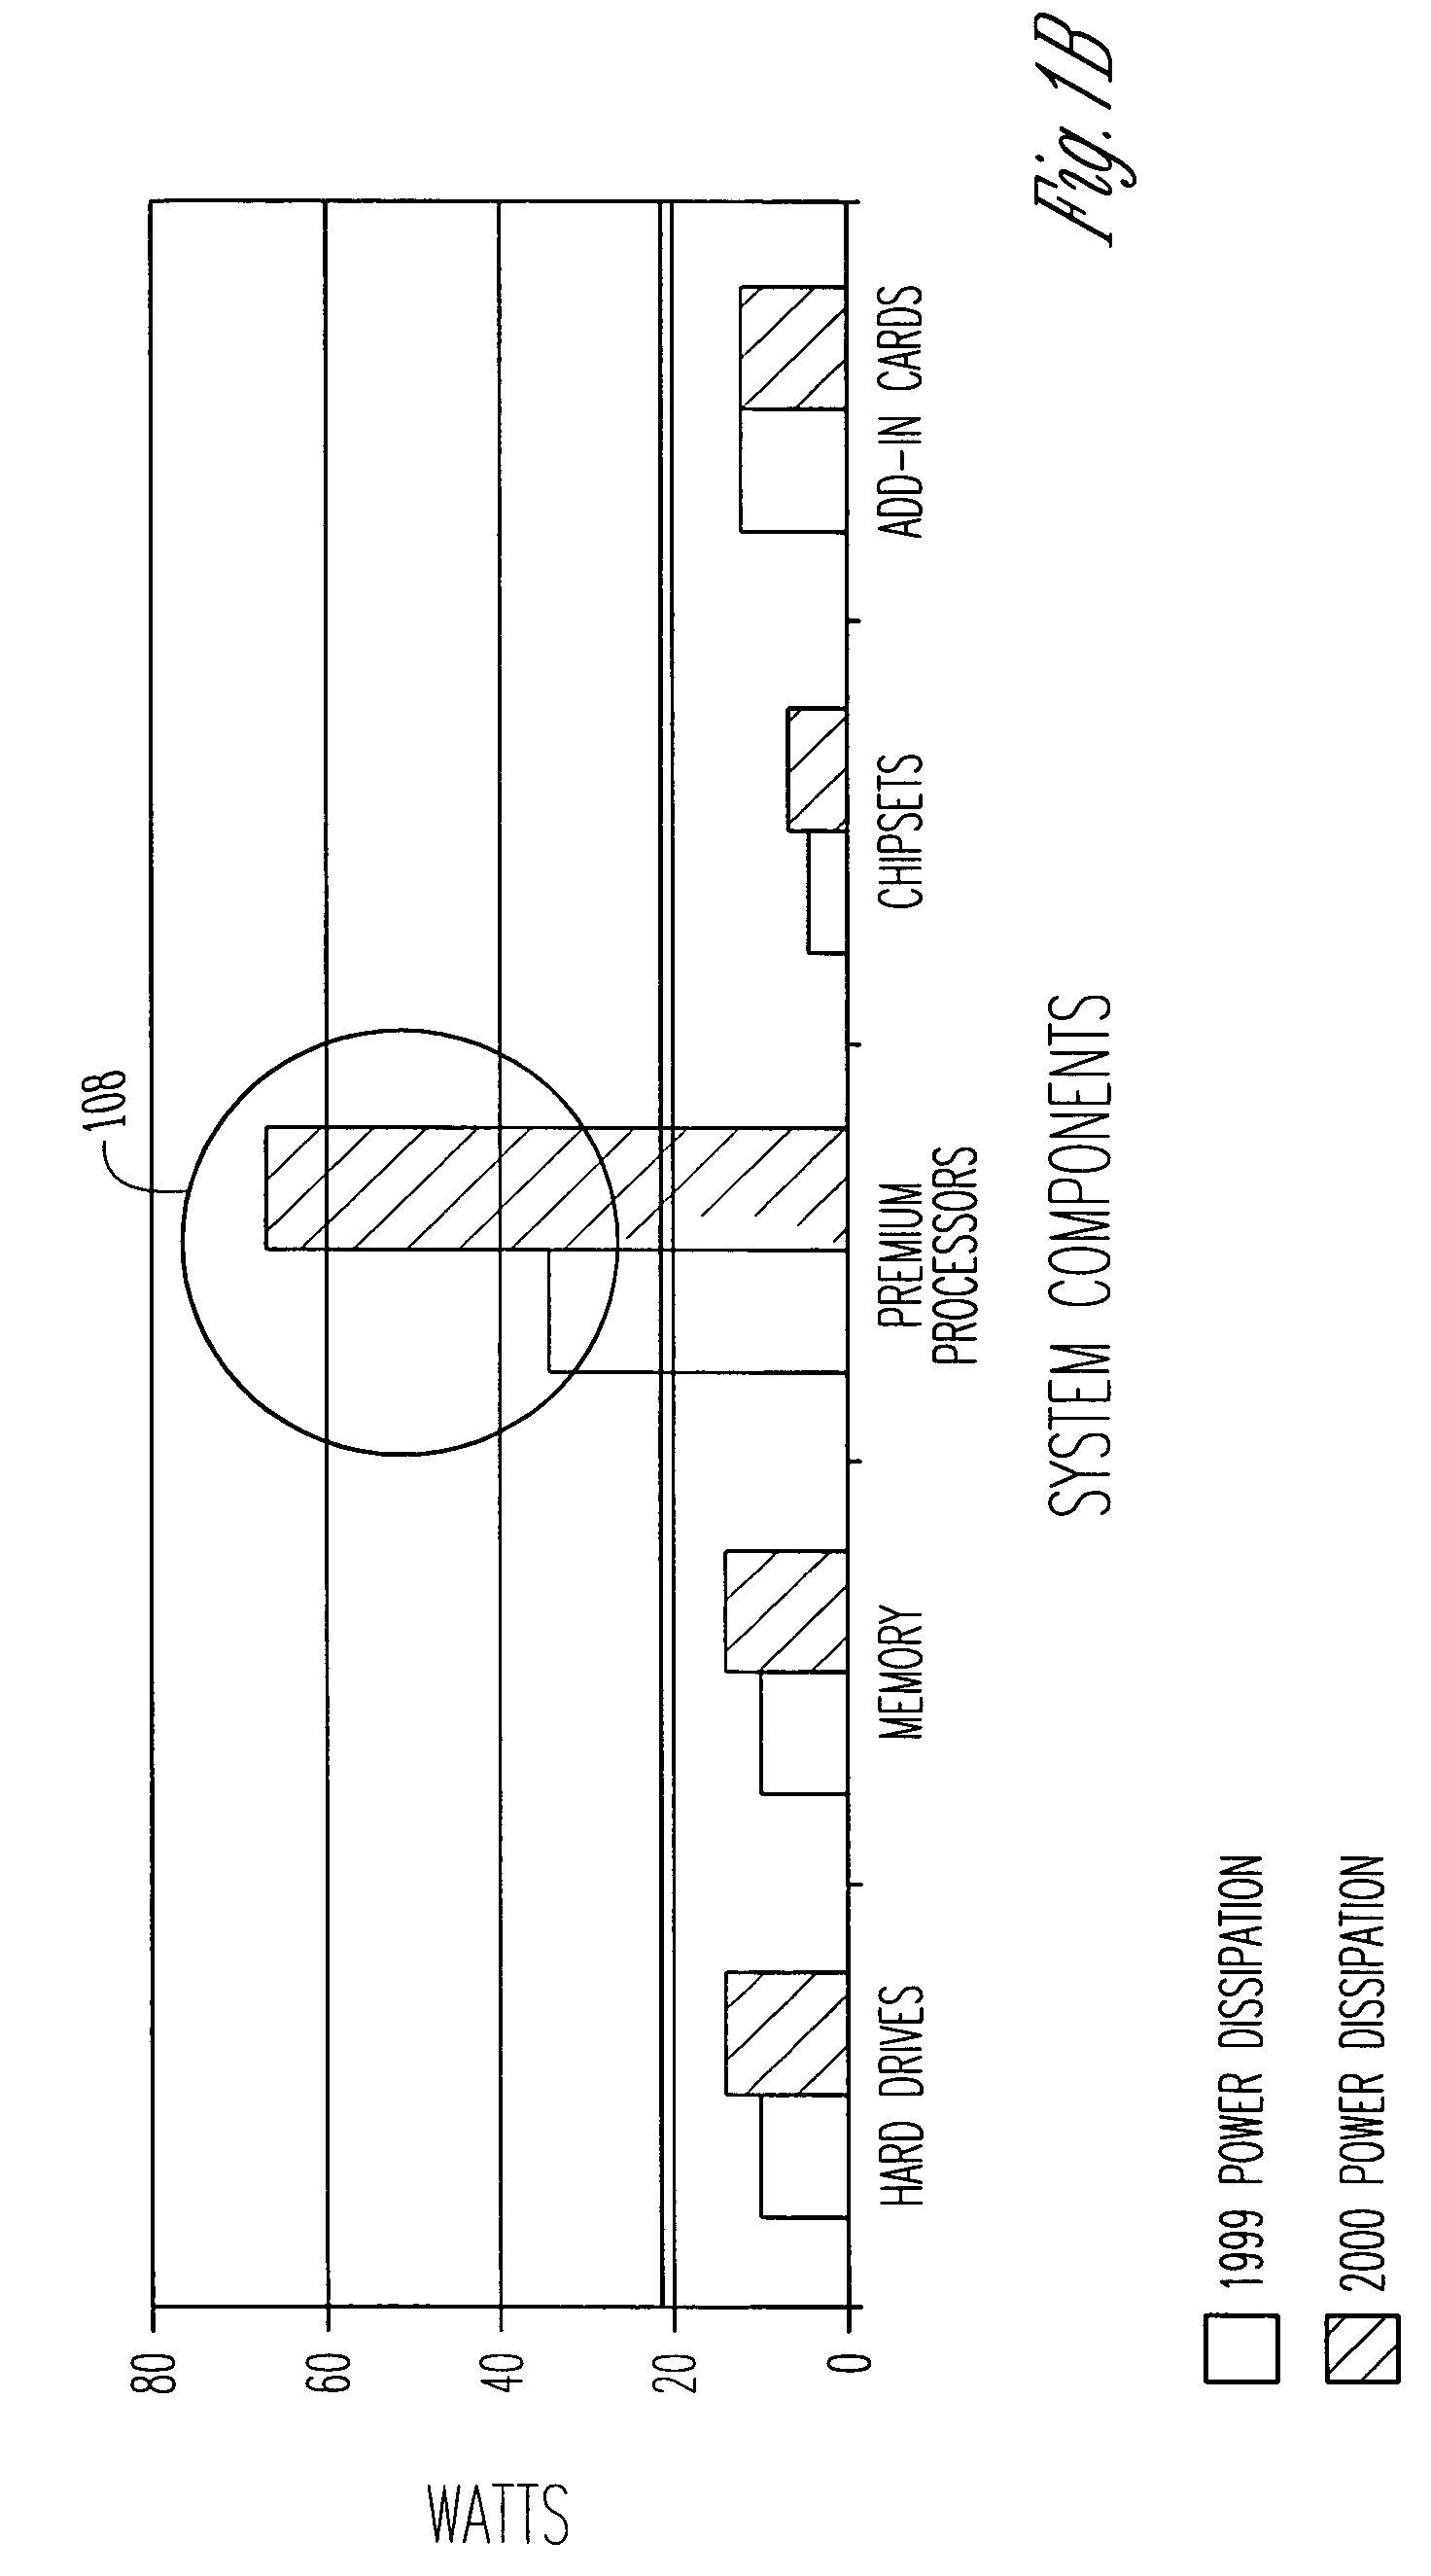 Method and apparatus for dissipating heat from an electronic device